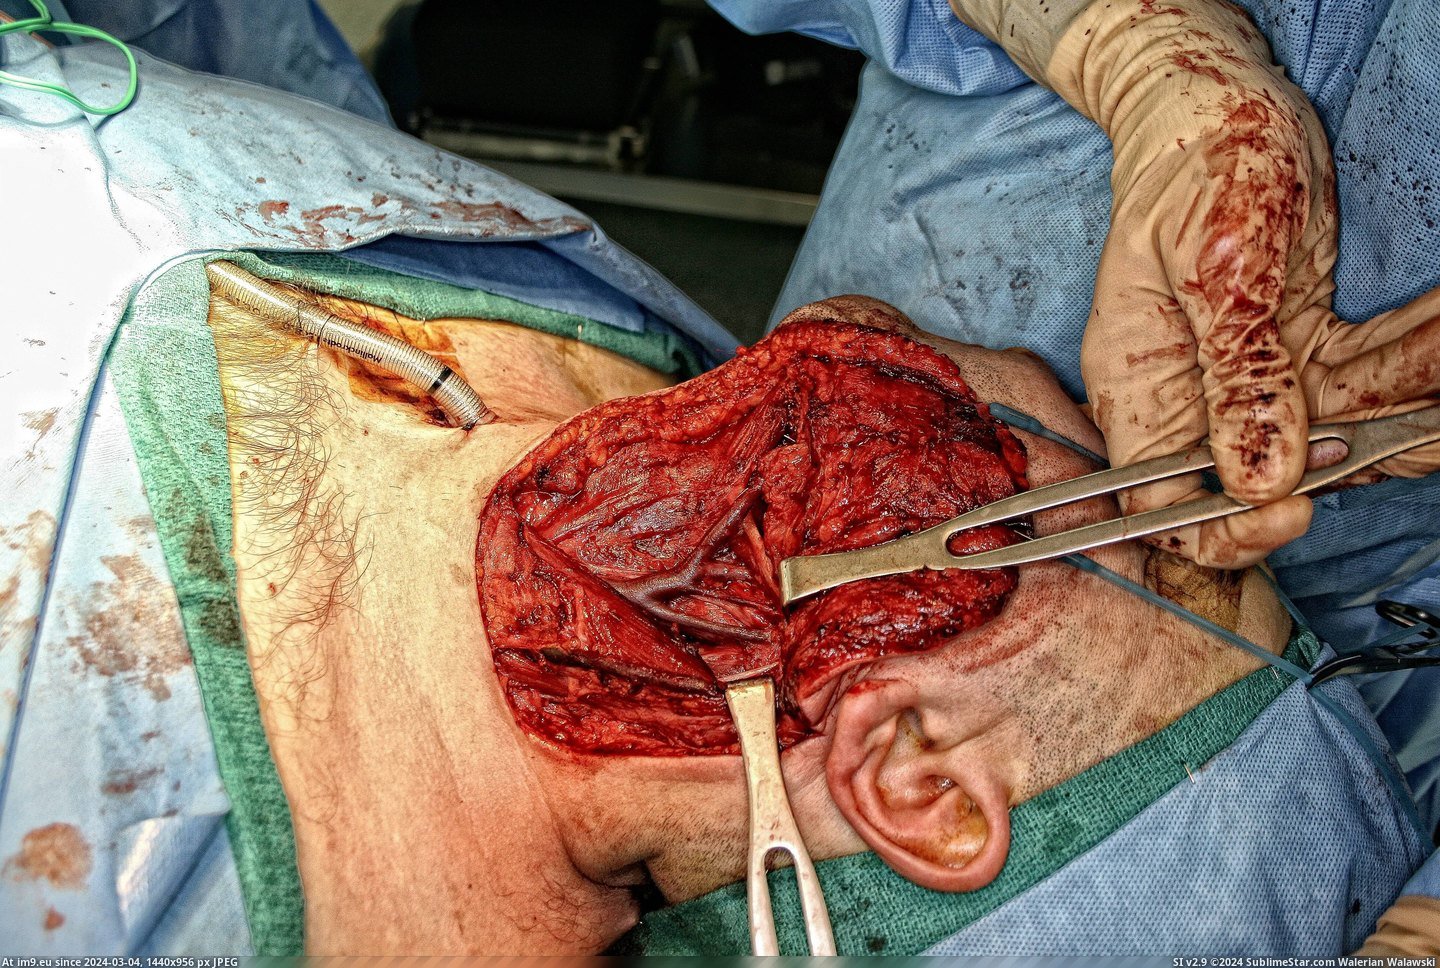 #Wtf #Surgery #Cancer #Oral [Wtf] Oral Cancer Surgery 7 Pic. (Image of album My r/WTF favs))